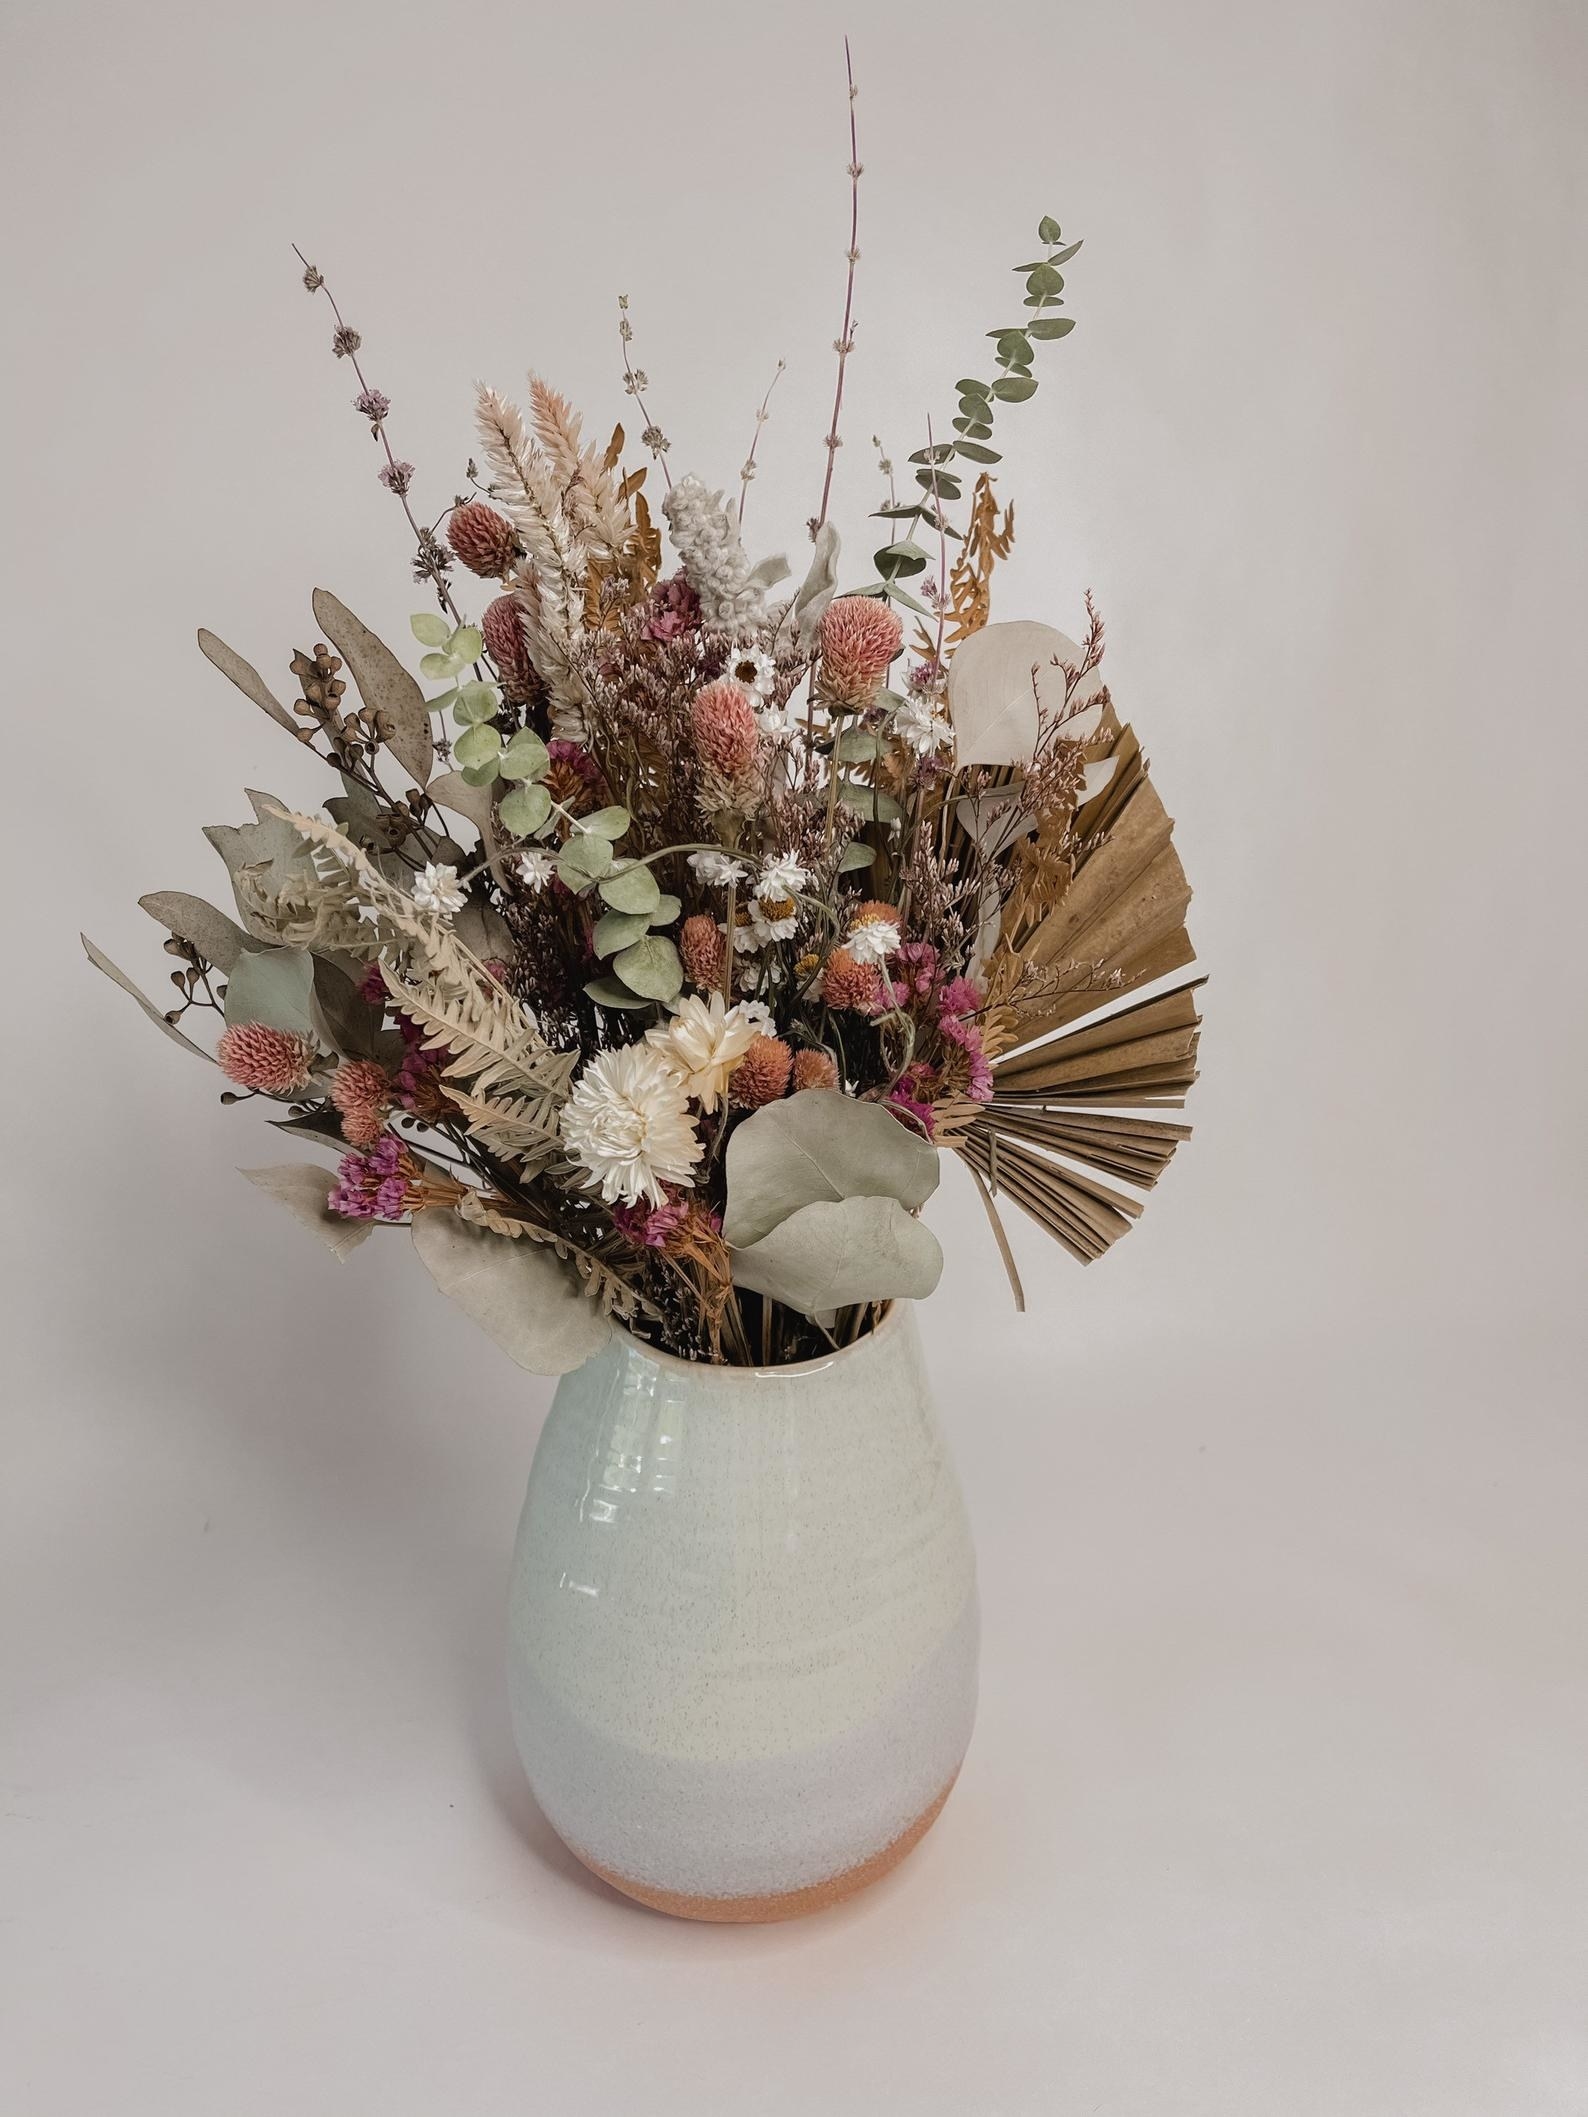 bouquet of different dried flowers and greenery in a vase